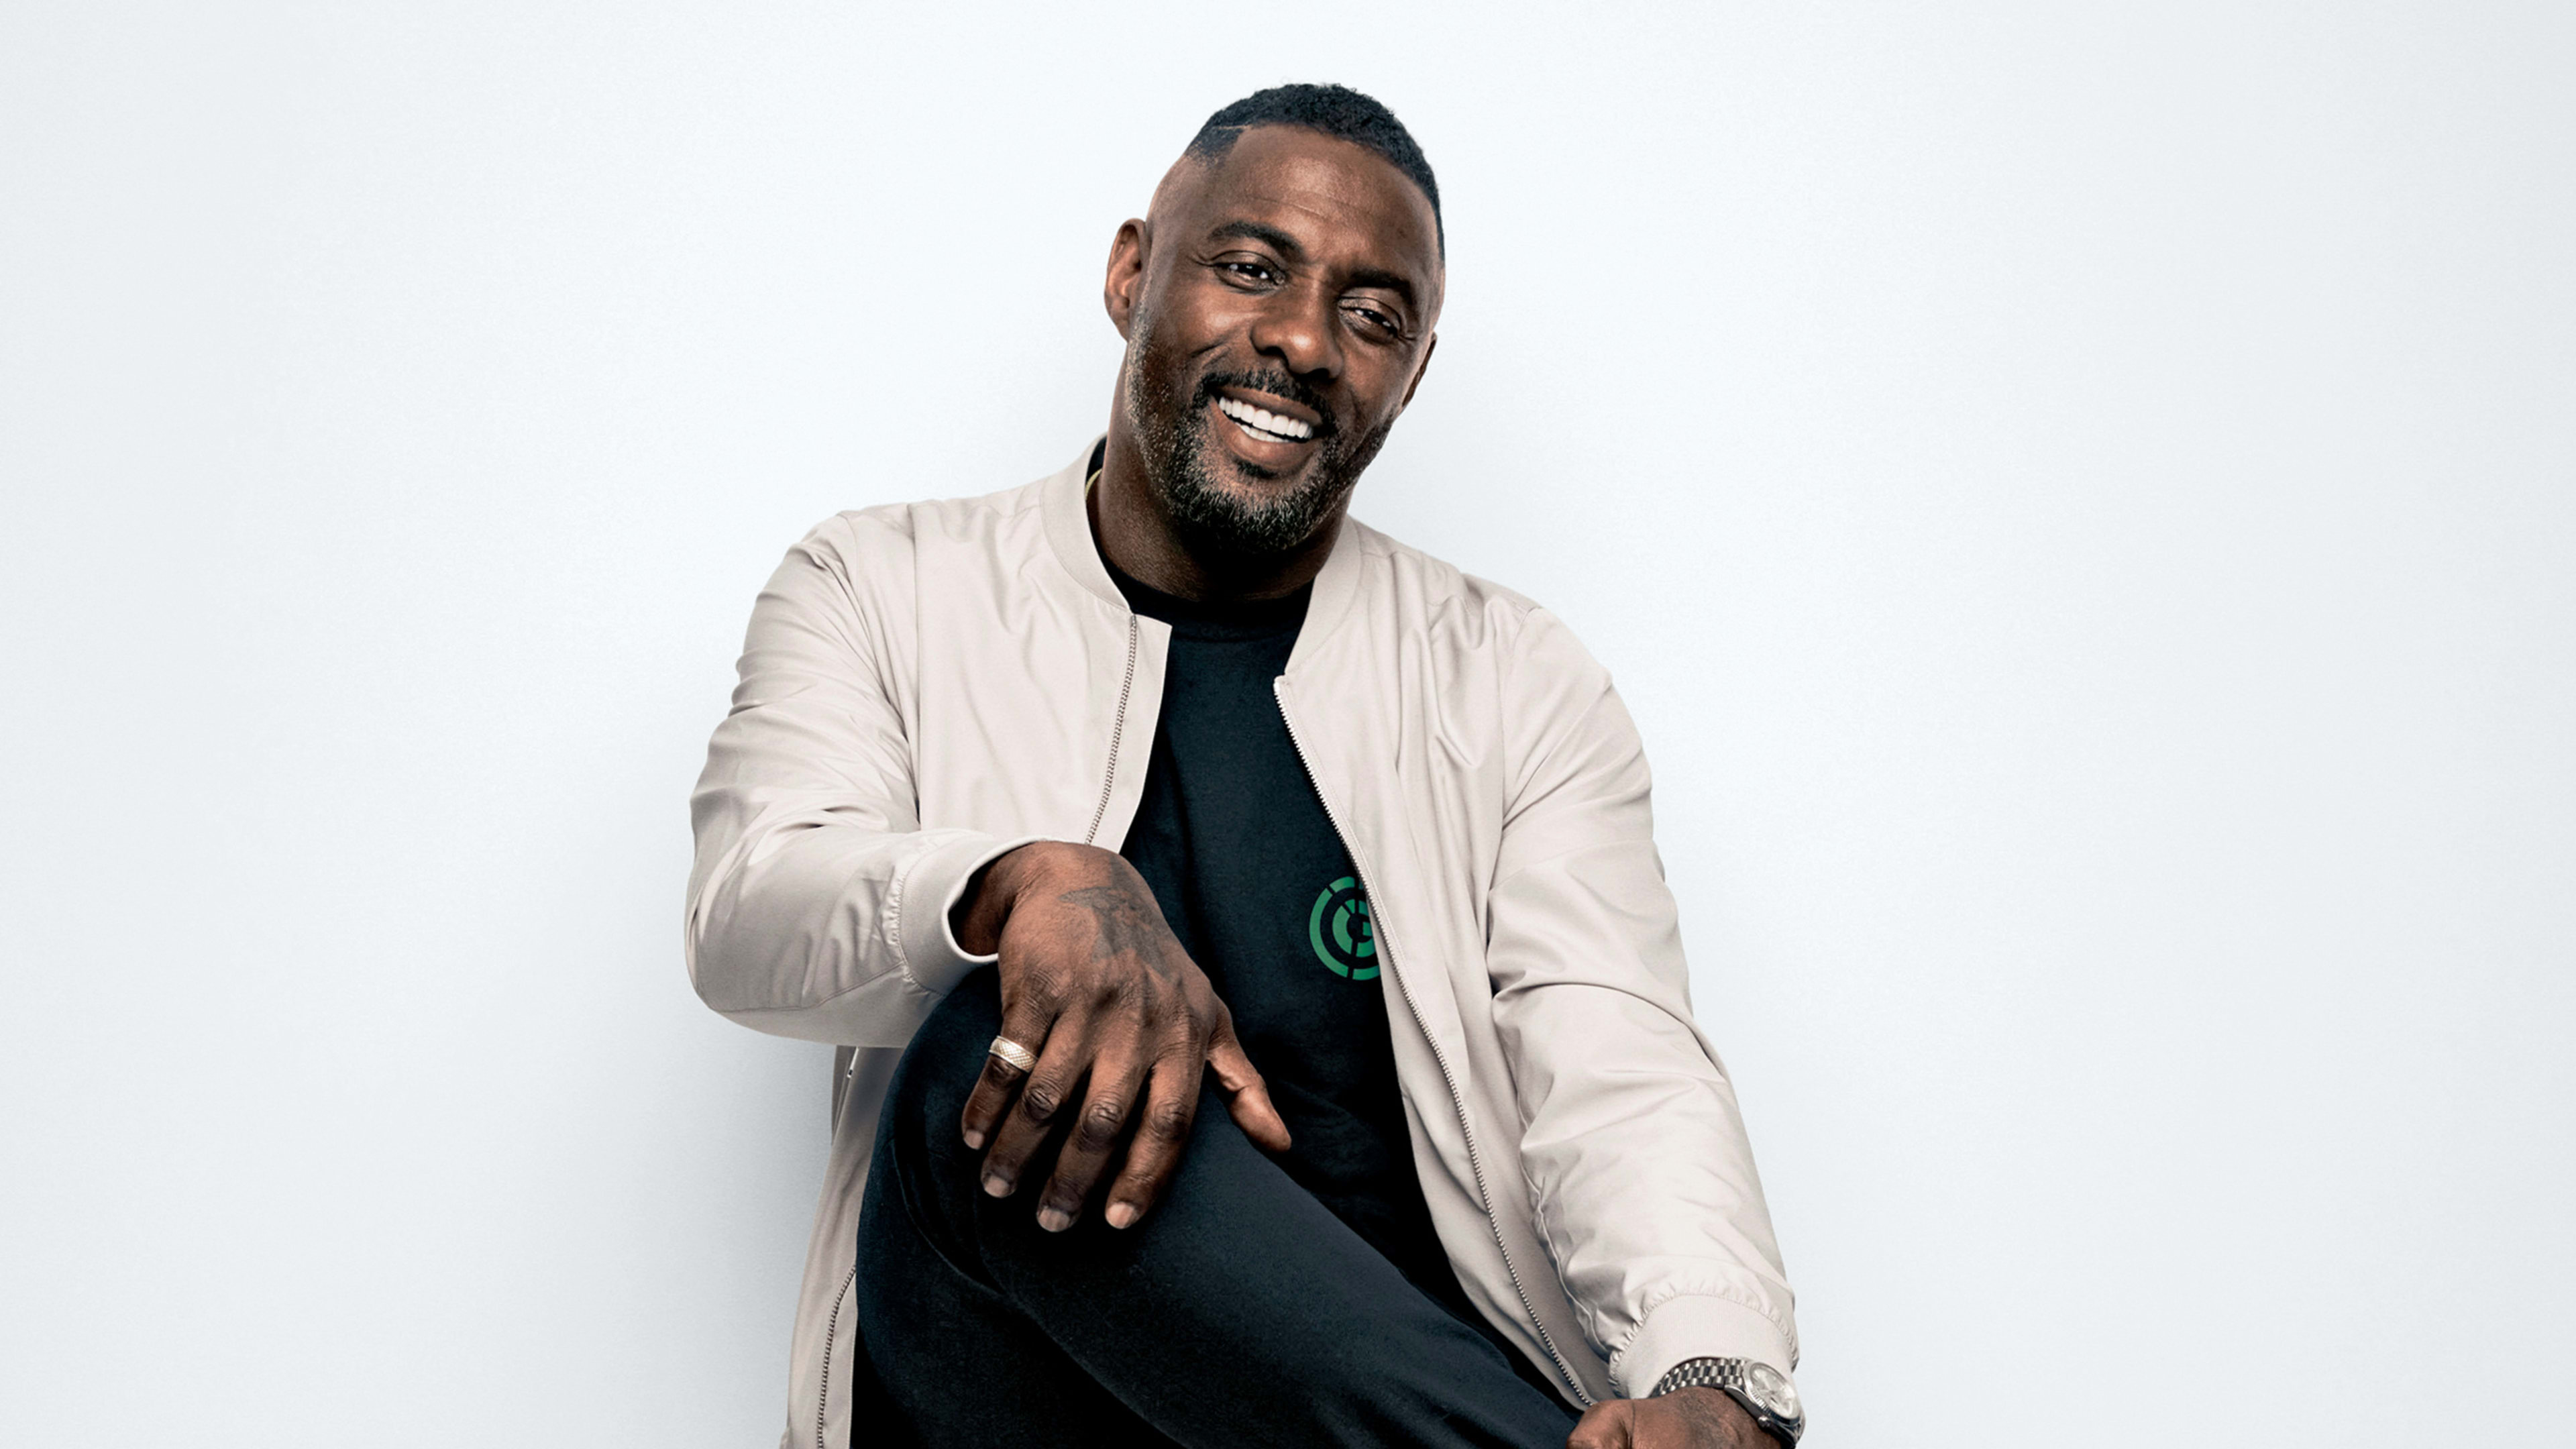 Idris Elba knows how to spend his downtime